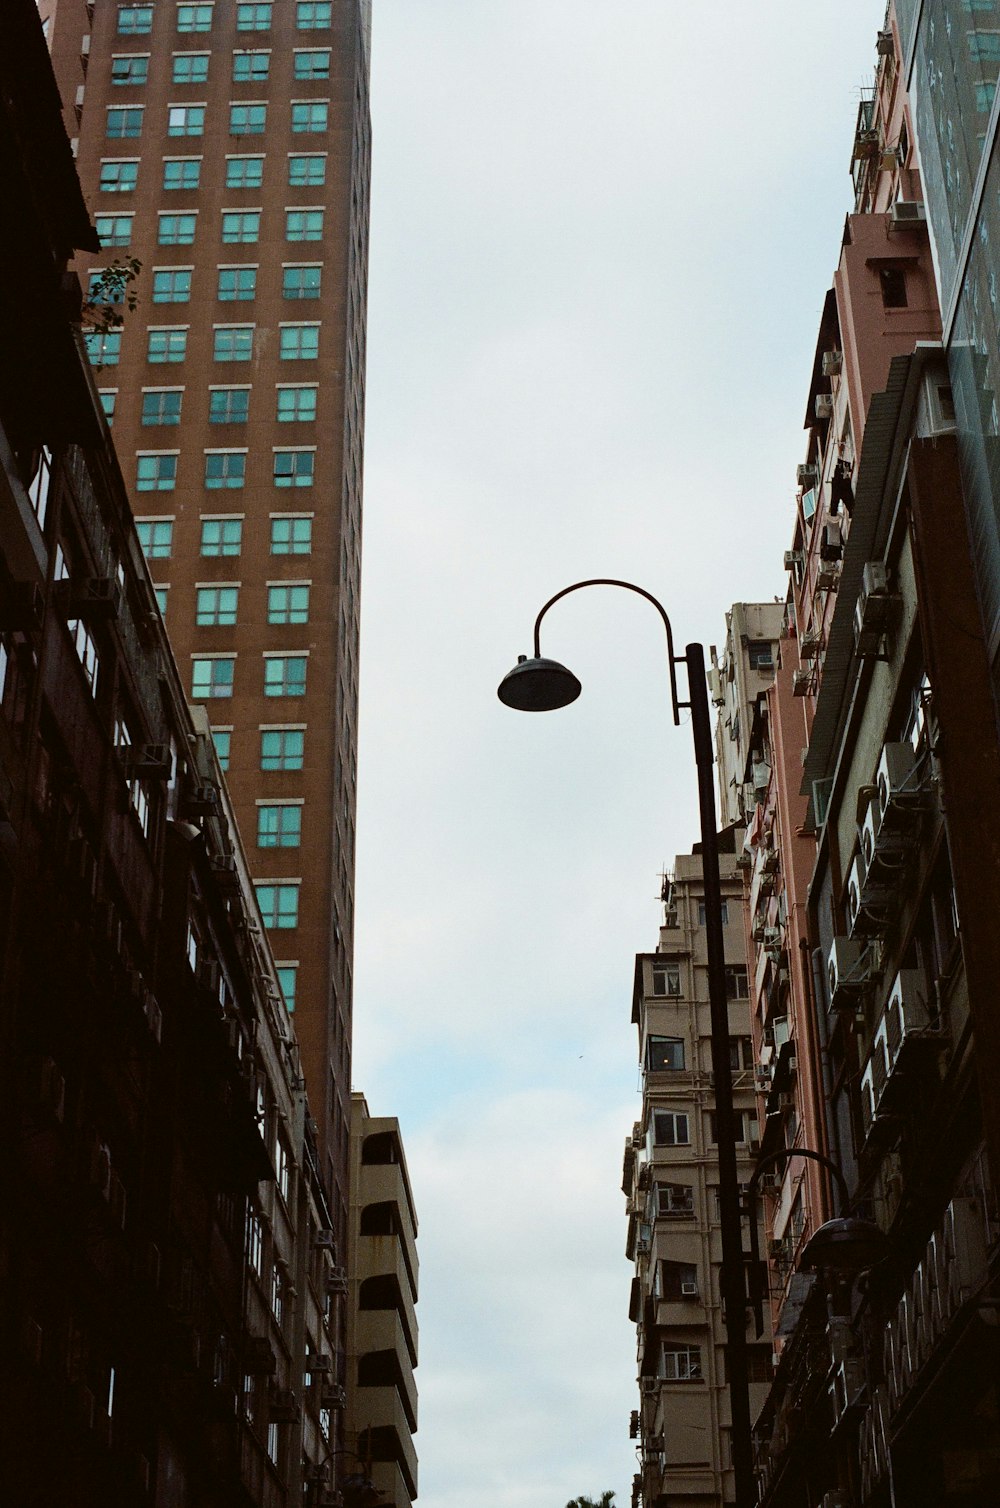 a street light in the middle of a city